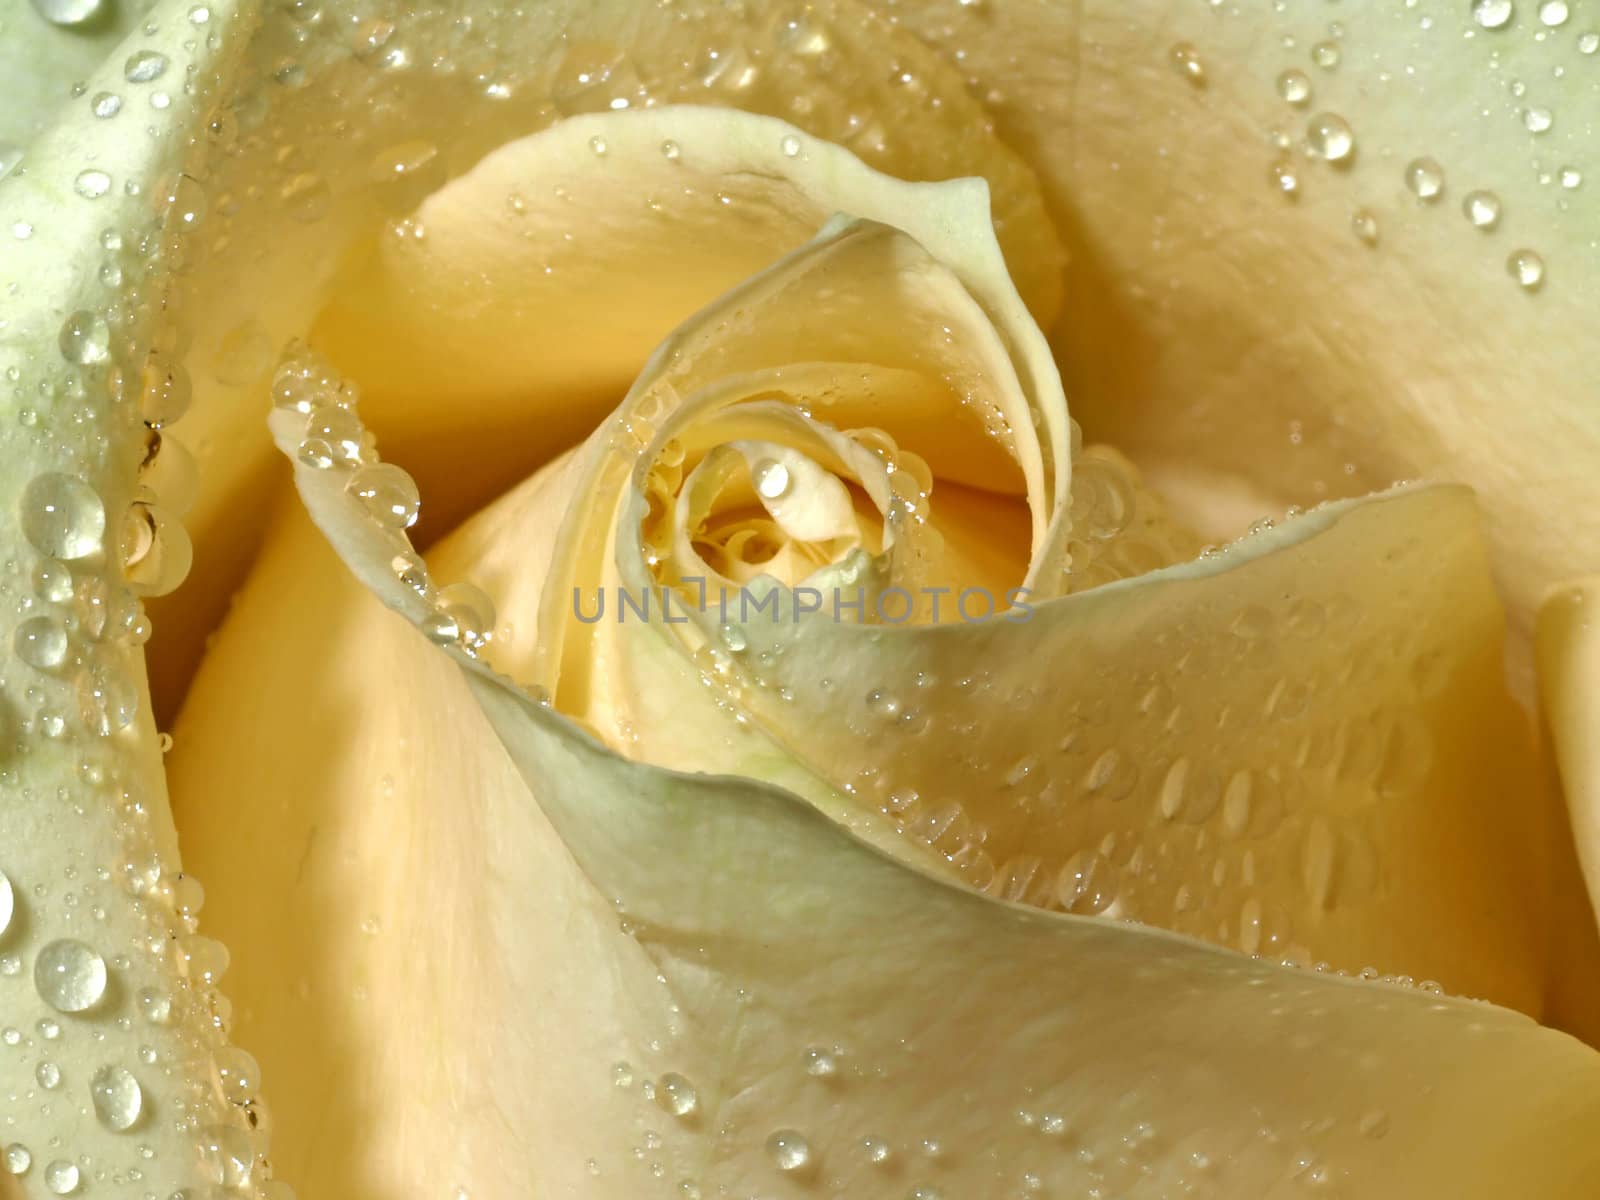 macro of a rose with water drops